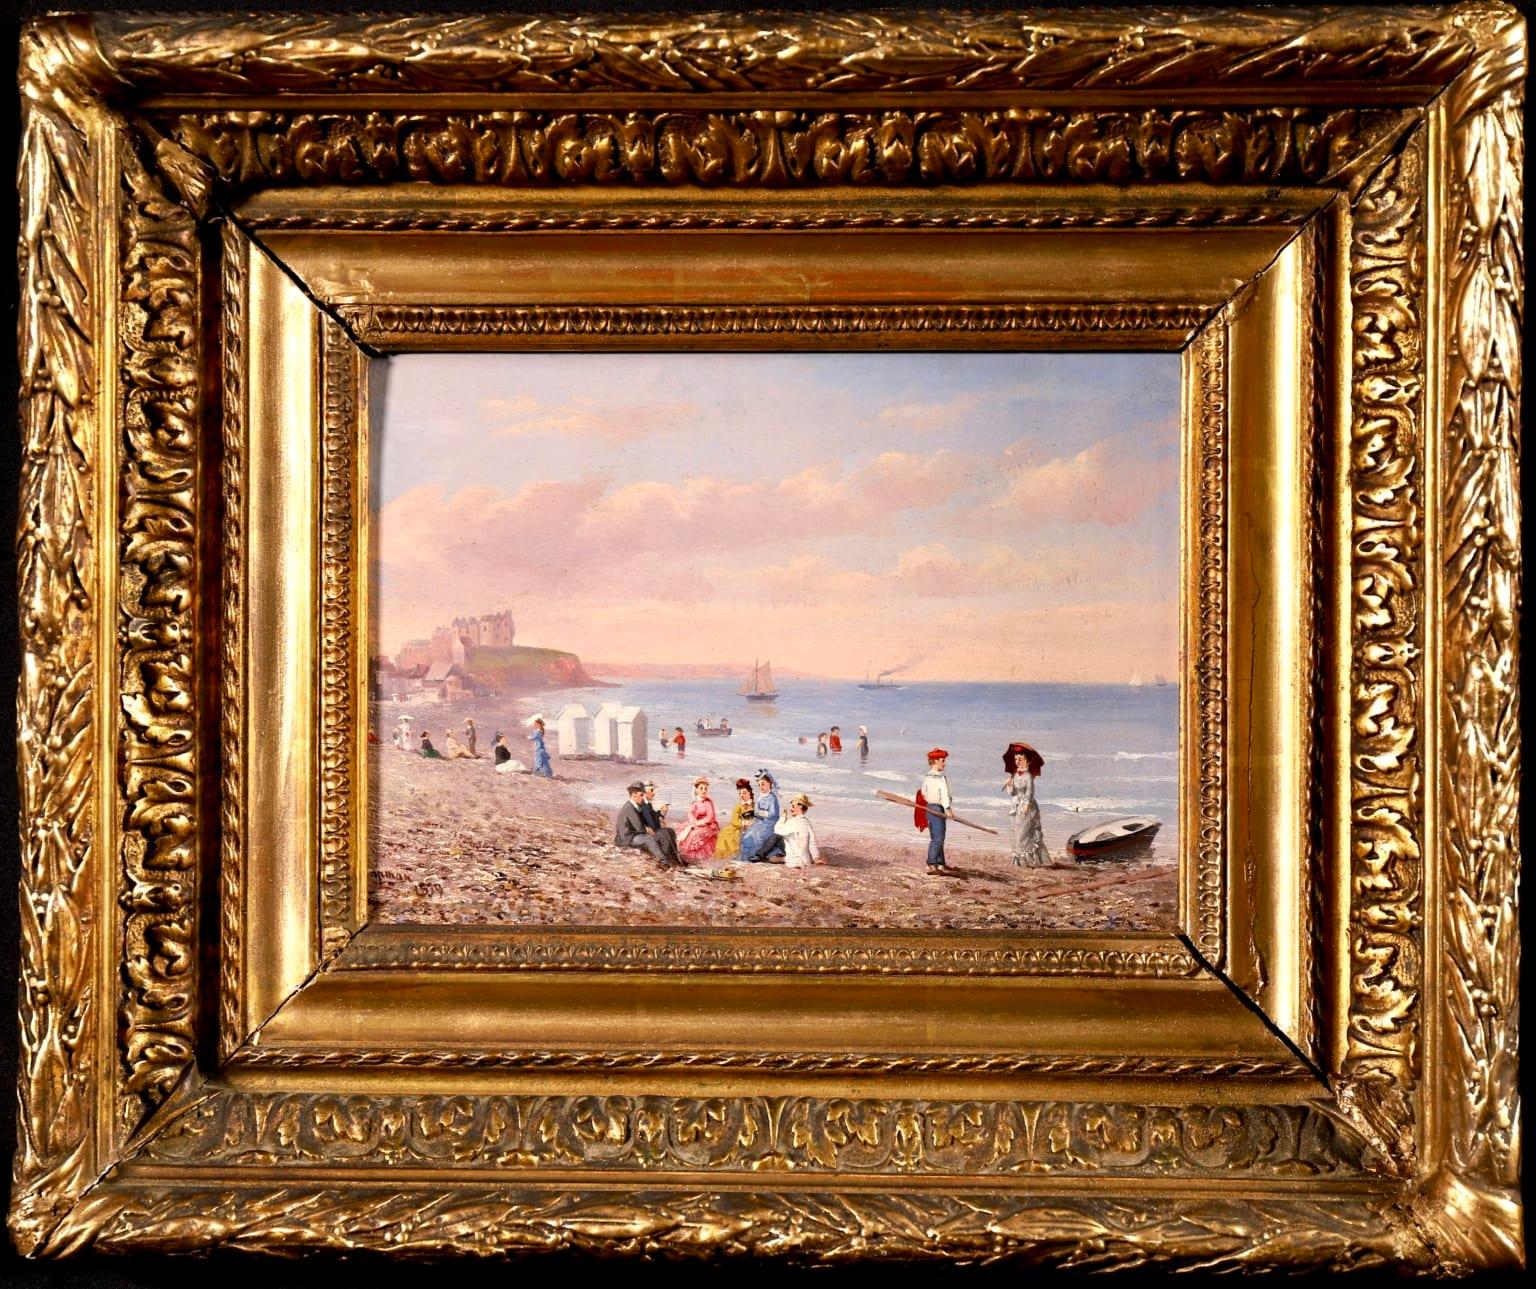 Dieppe-Figures on the Beach - Impressionist Oil, Figures Landscape - C W Chapman - Painting by Conrad Wise Chapman